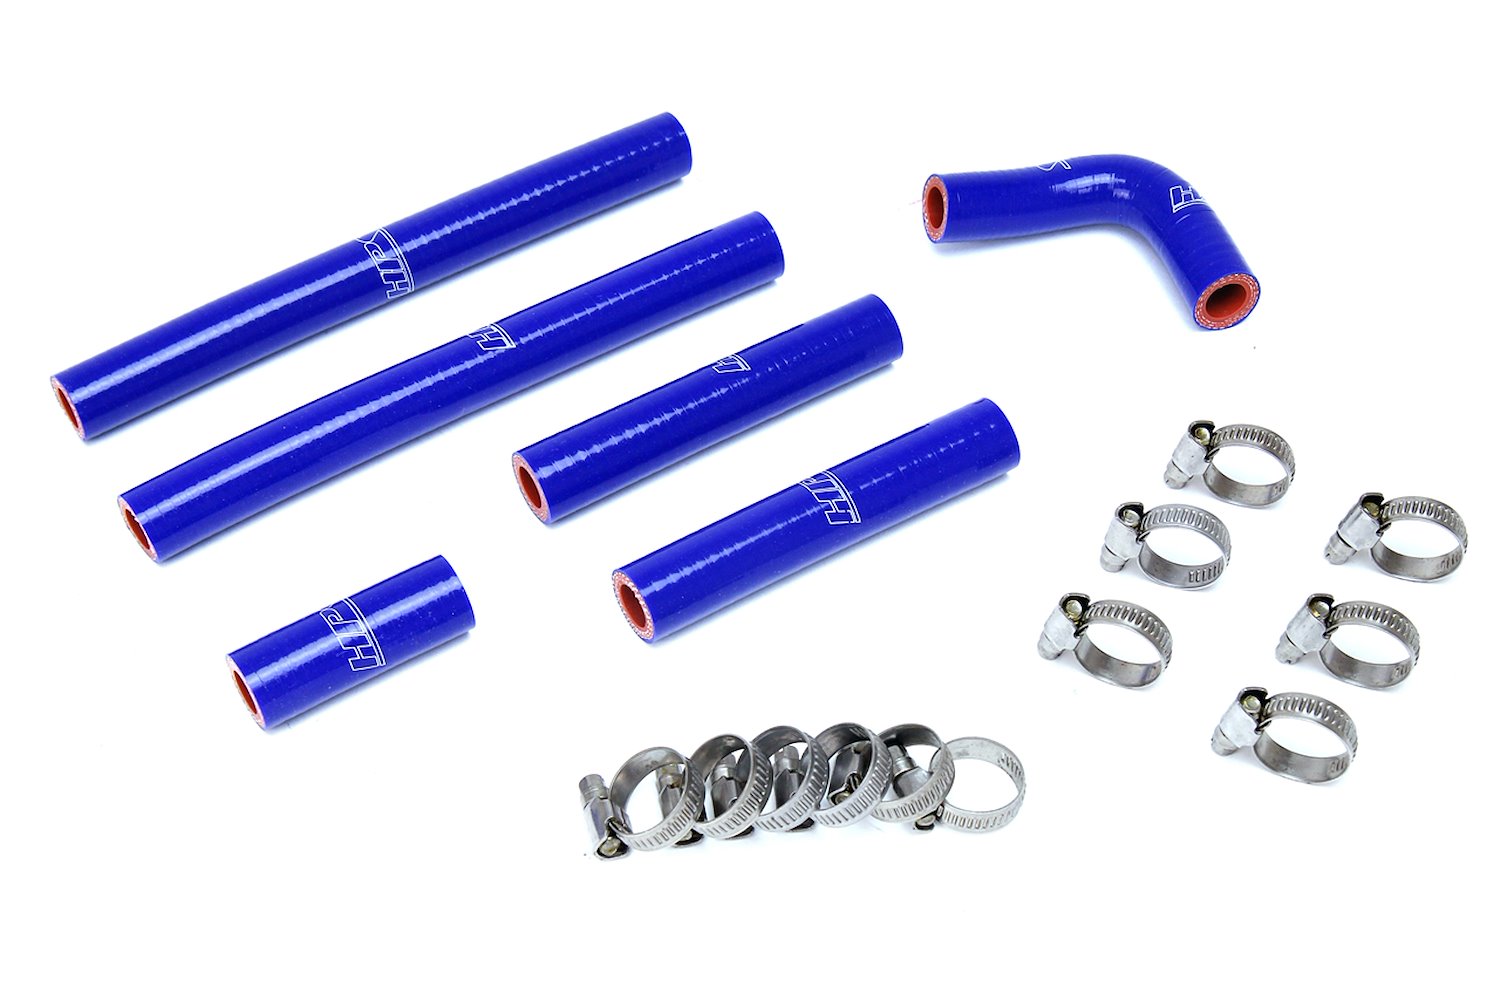 57-1638-BLUE Heater Hose Kit, High-Temp 3-Ply Reinforced Silicone, Replace OEM Rubber Heater Coolant Hoses